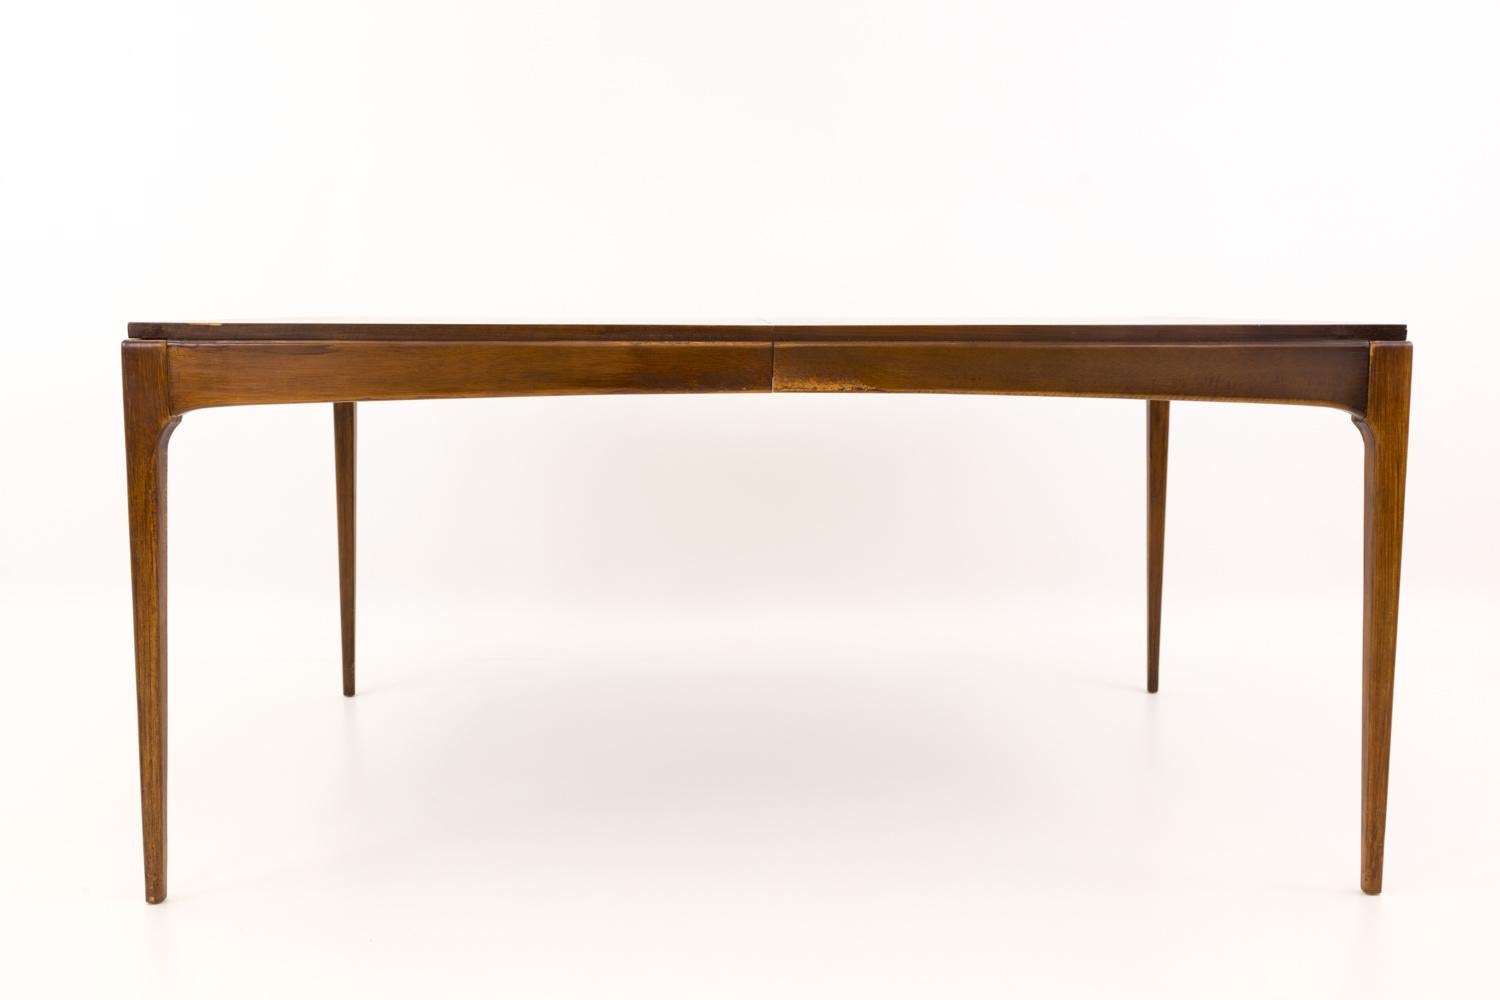 Lane Rhythm Paul McCobb Style Extra Long Wide Mid Century Dining Table

This table measures: 62 wide x 40 deep x 29.25 high, with a chair clearance of 26.25 inches, each leaf is 18 inches wide, making the maximum table width of 98 inches when both